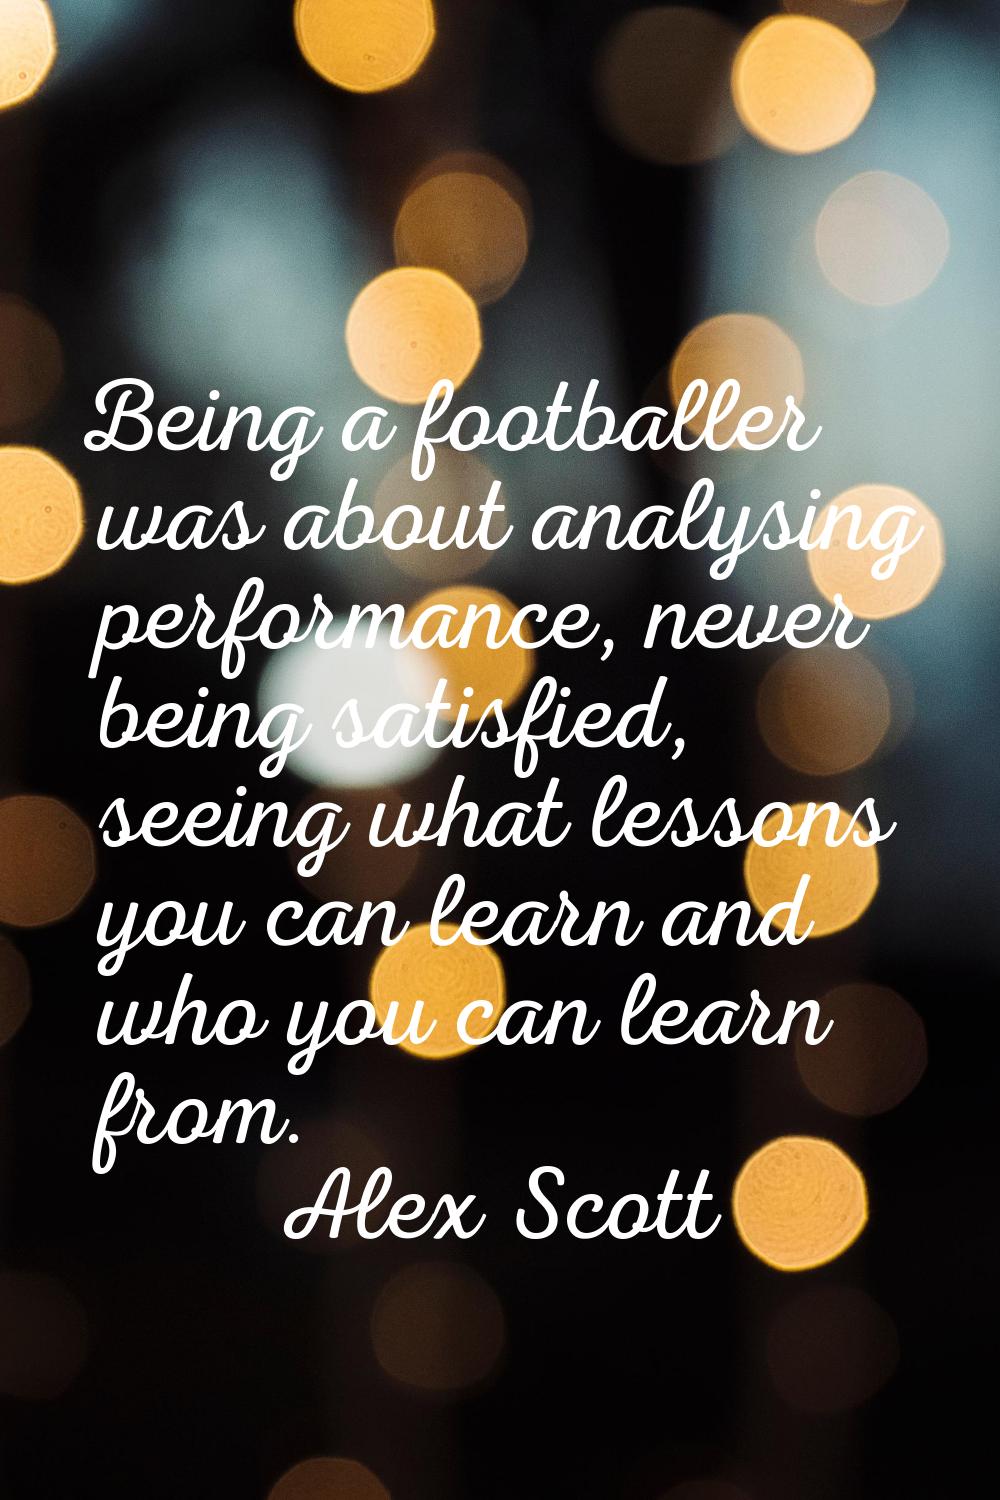 Being a footballer was about analysing performance, never being satisfied, seeing what lessons you 